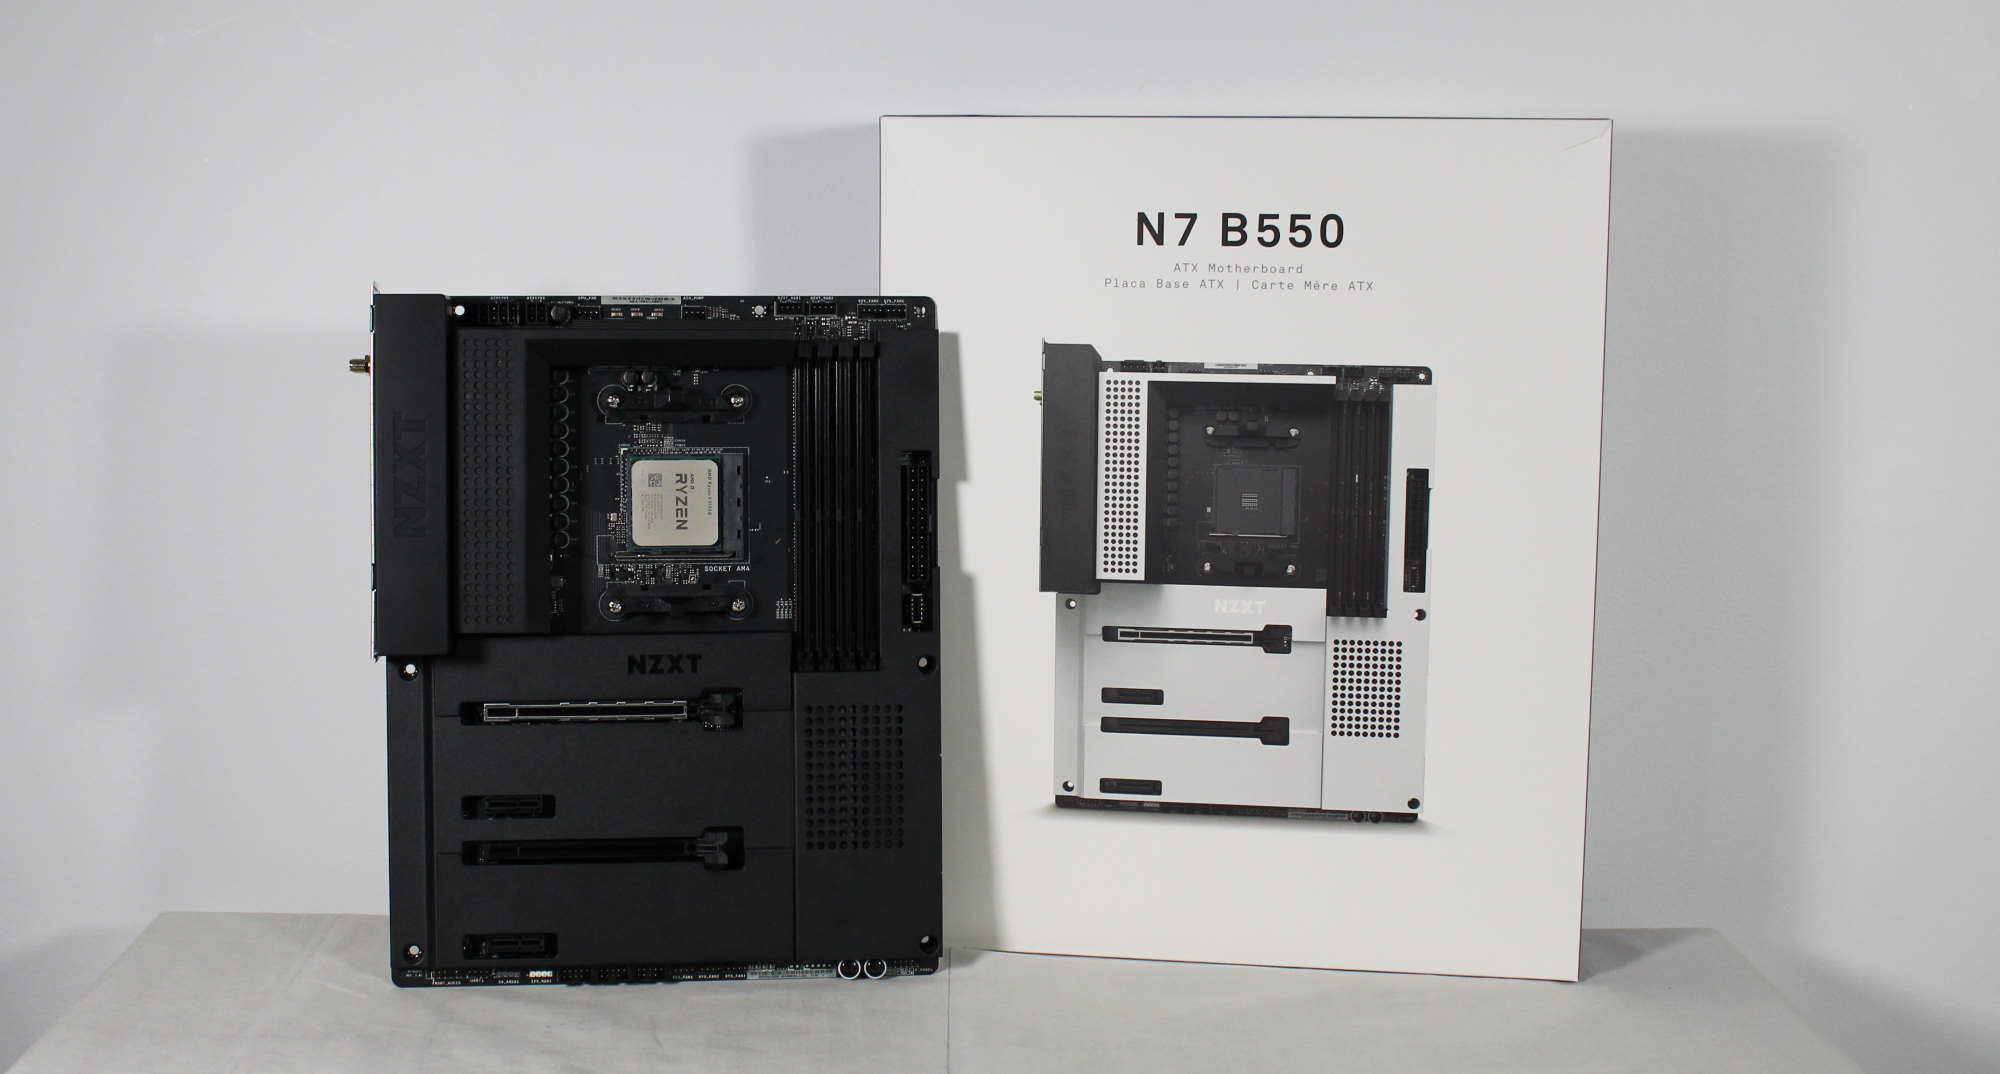 nzxt-n7-b550-review:-nzxt-meets-amd